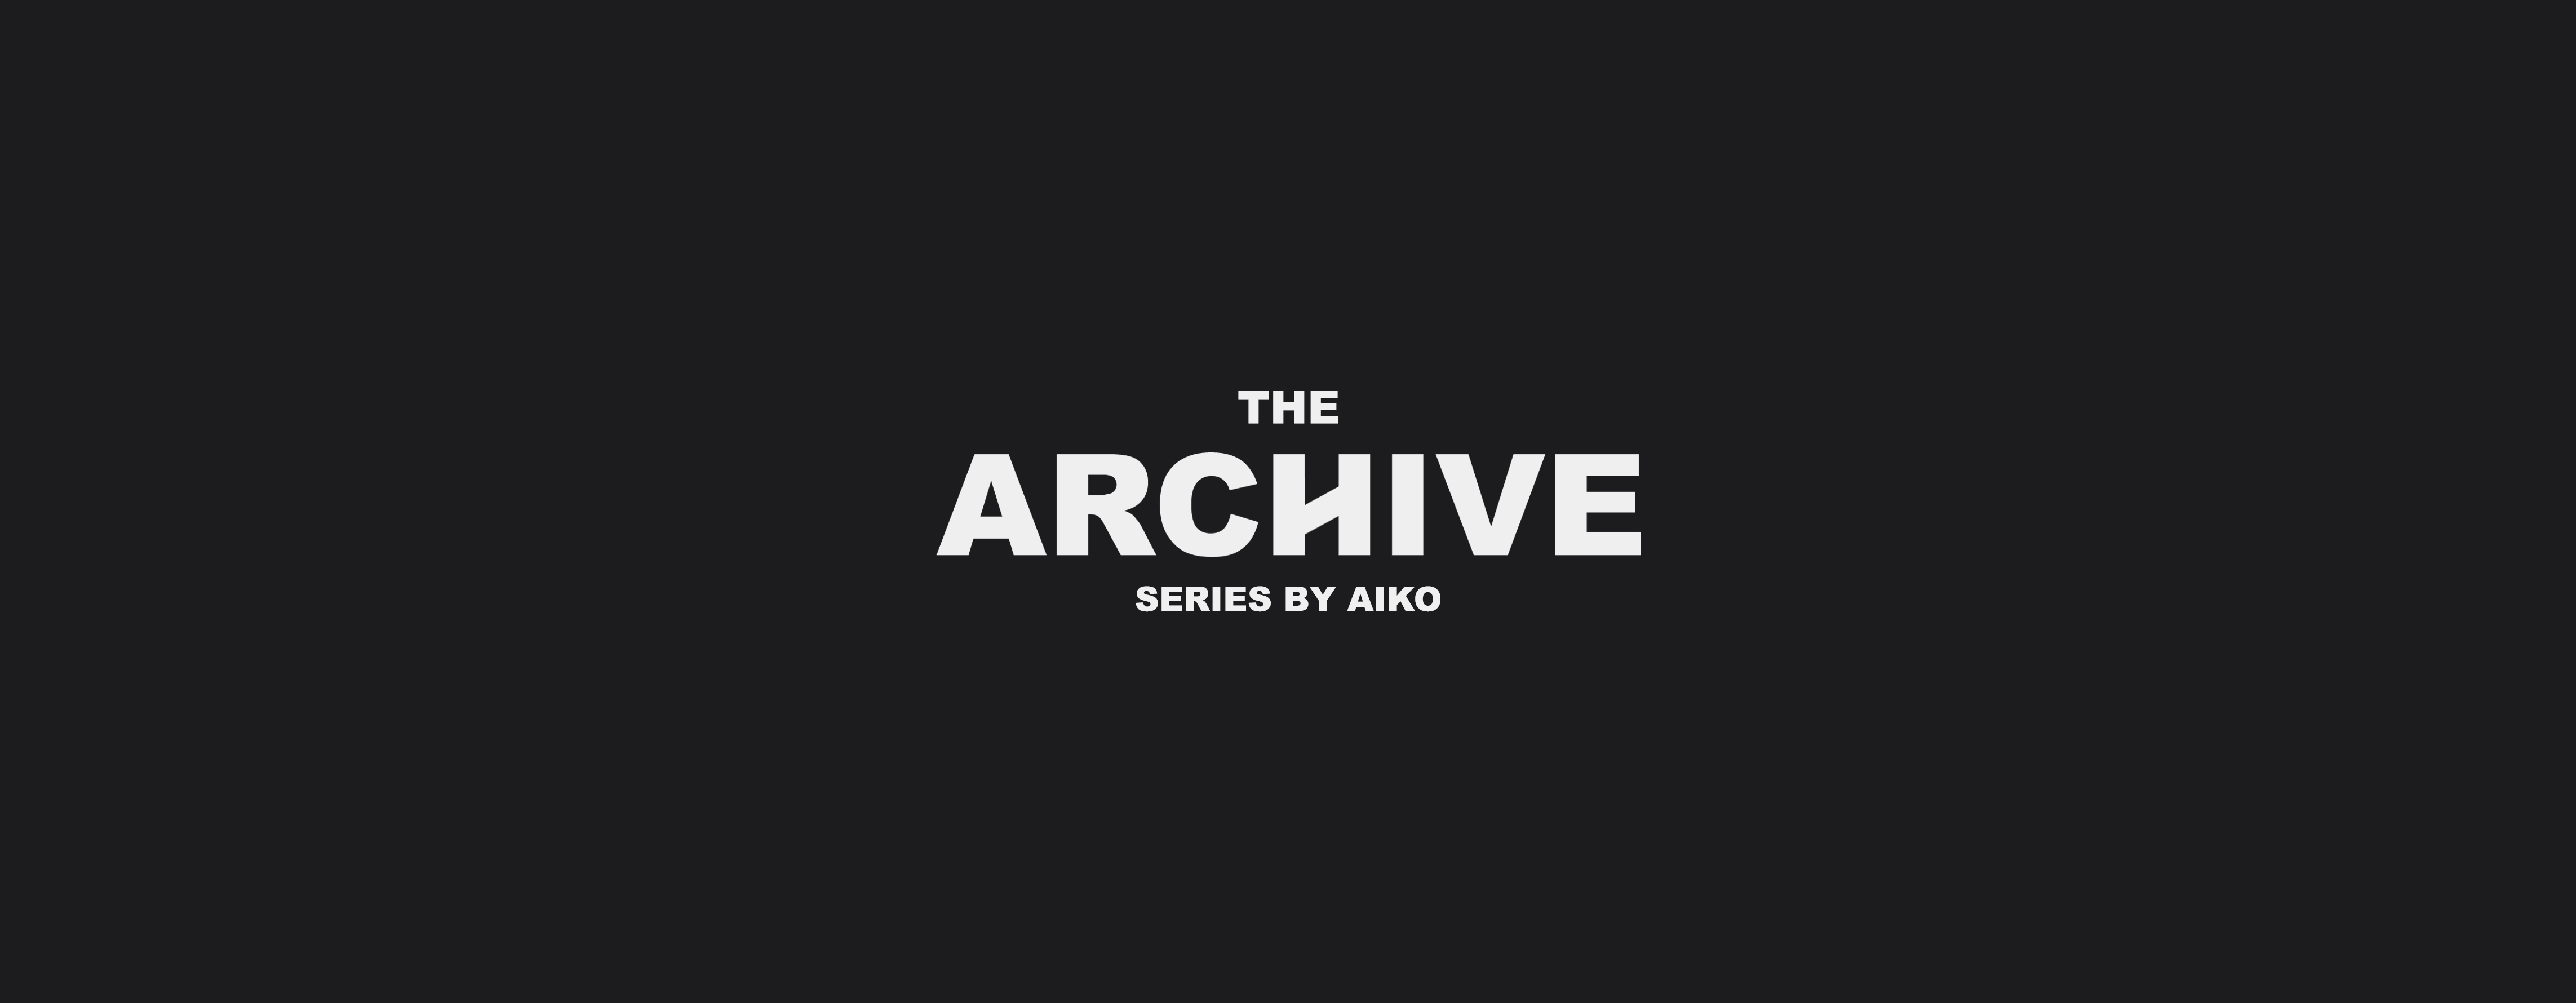 TheArchive banner